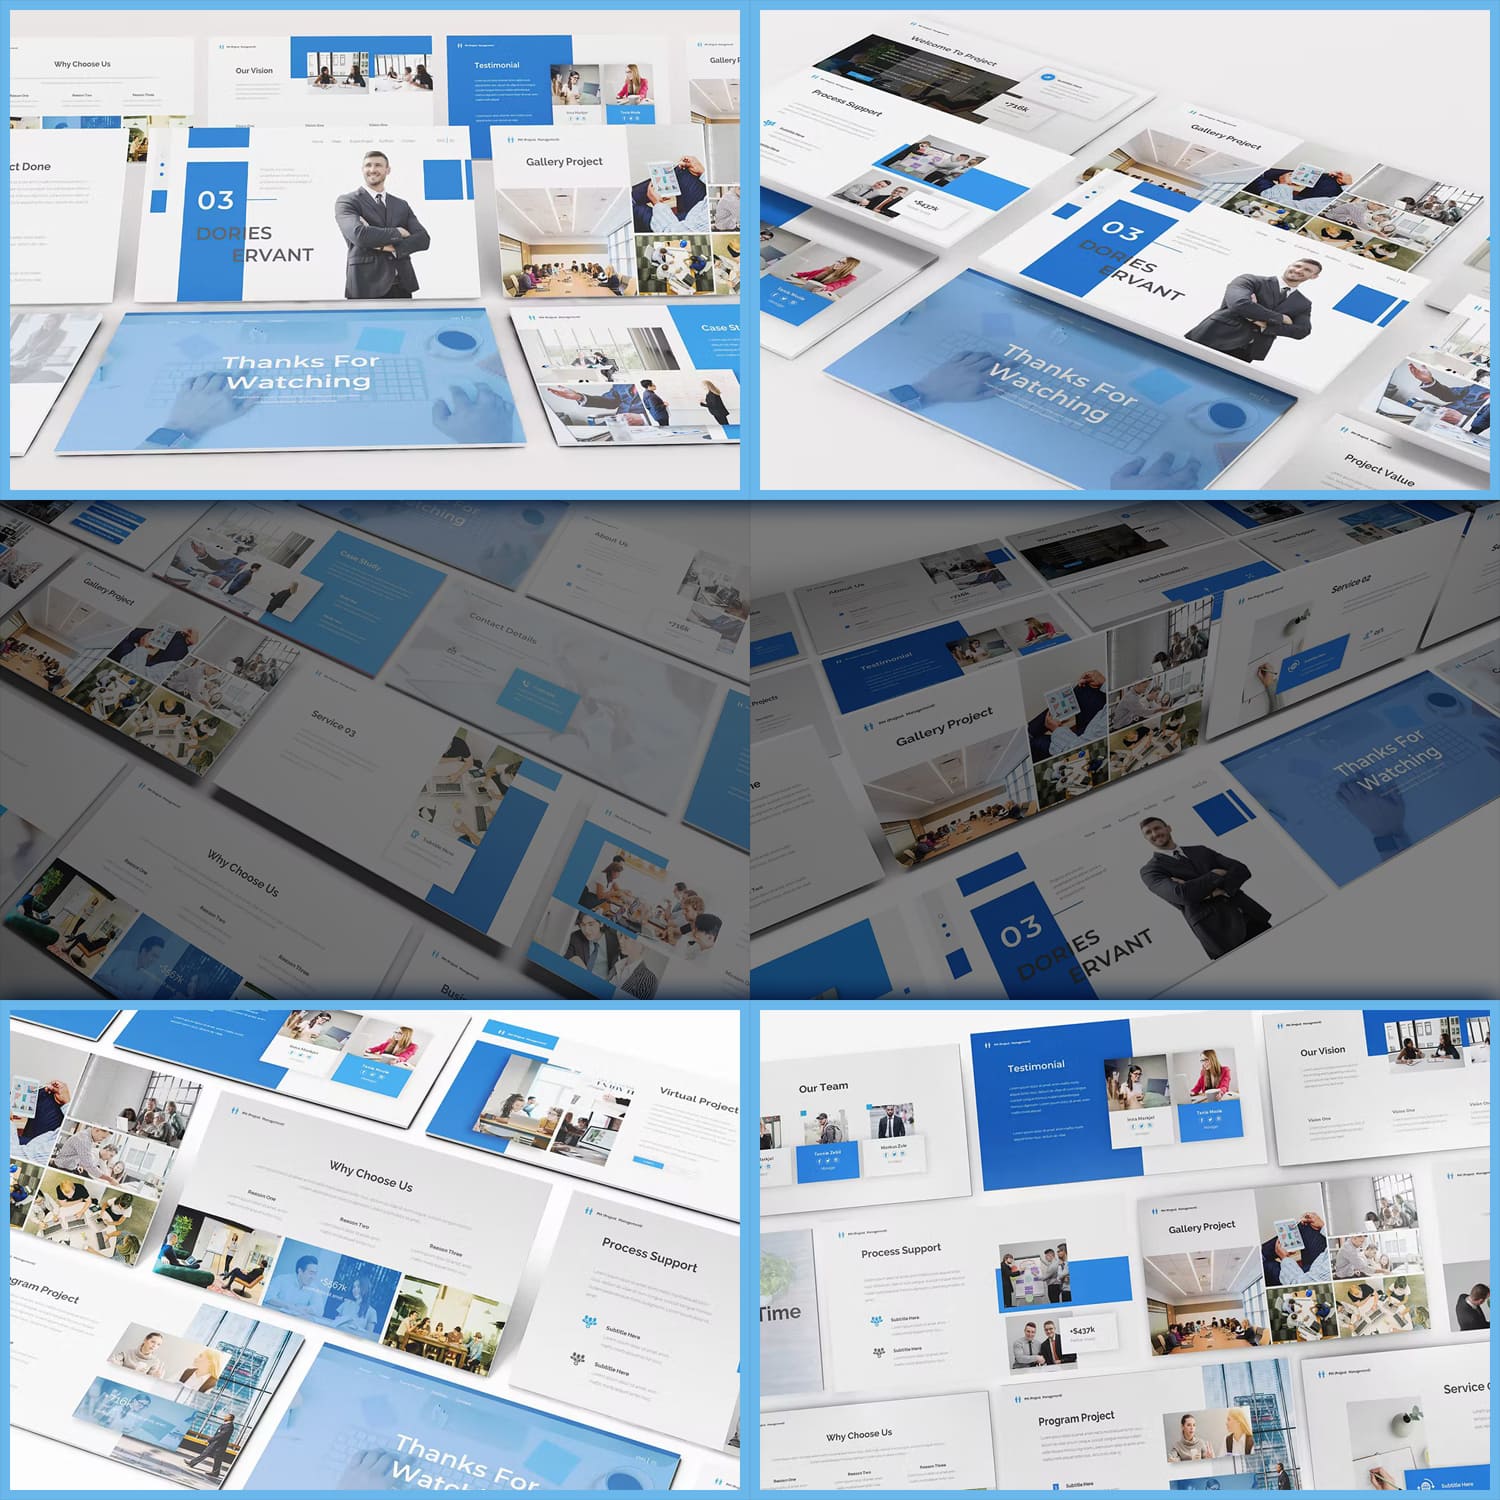 Project management powerpoint template from Formatika.